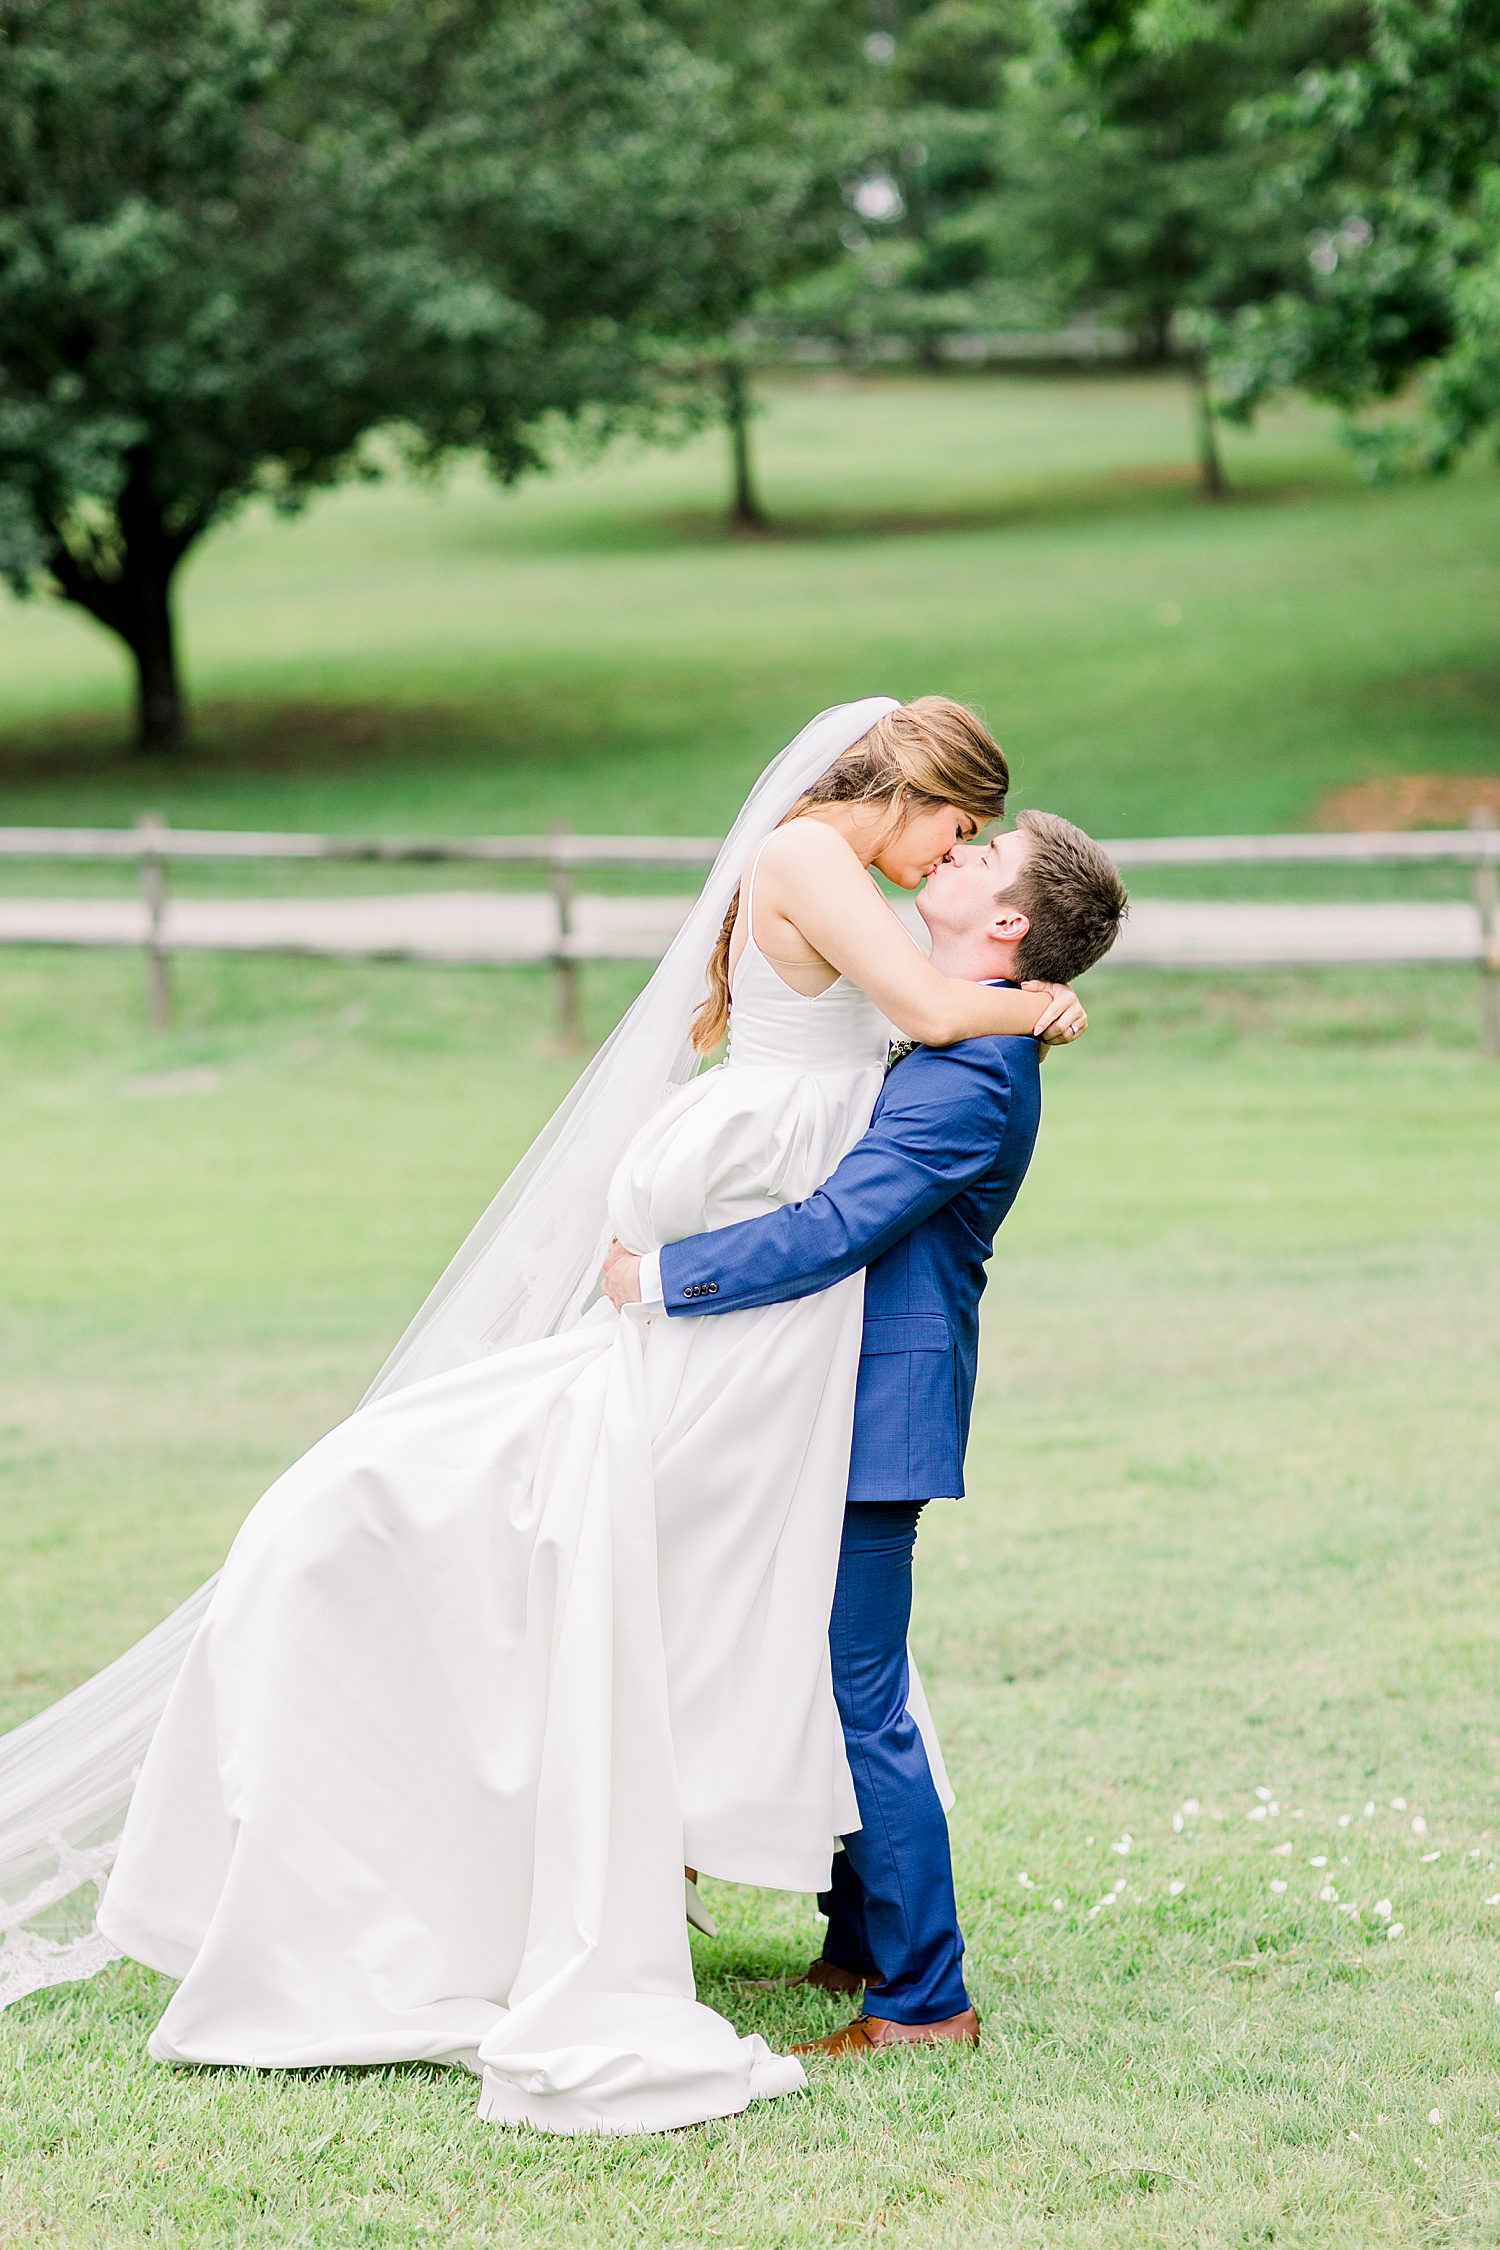 husband lifts his new Bride up in his arms